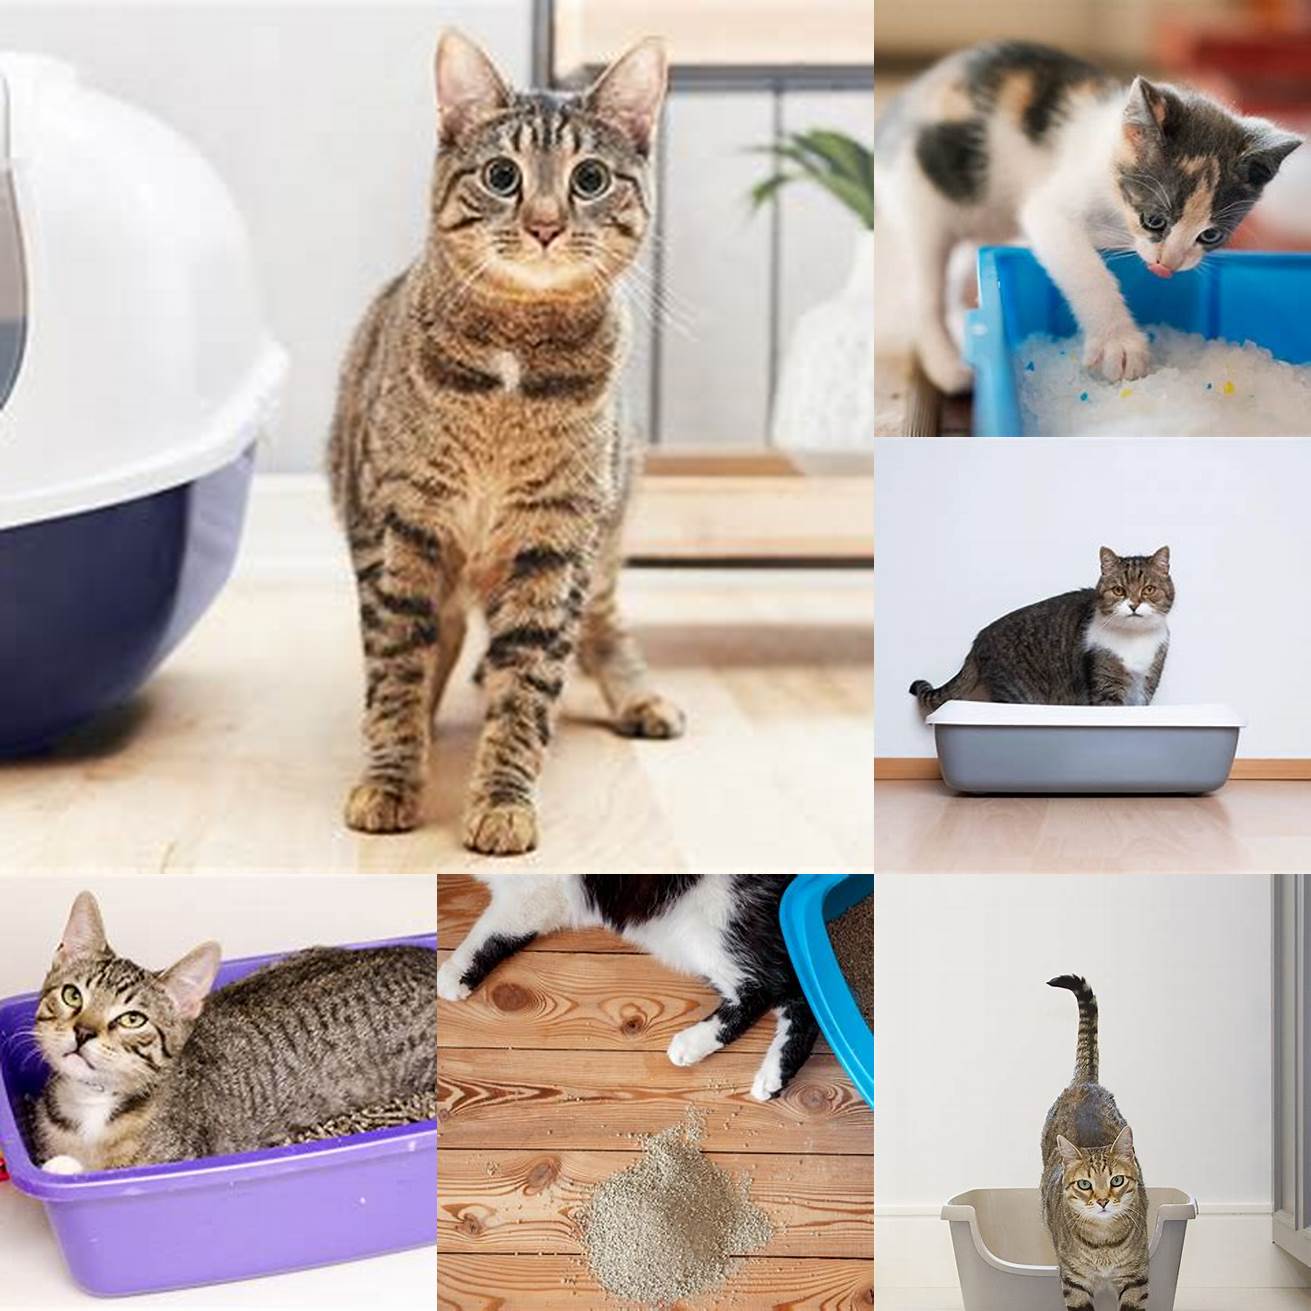 3 Litter Box Issues Walking your cat may disrupt their litter box routine and cause them to have accidents inside the house